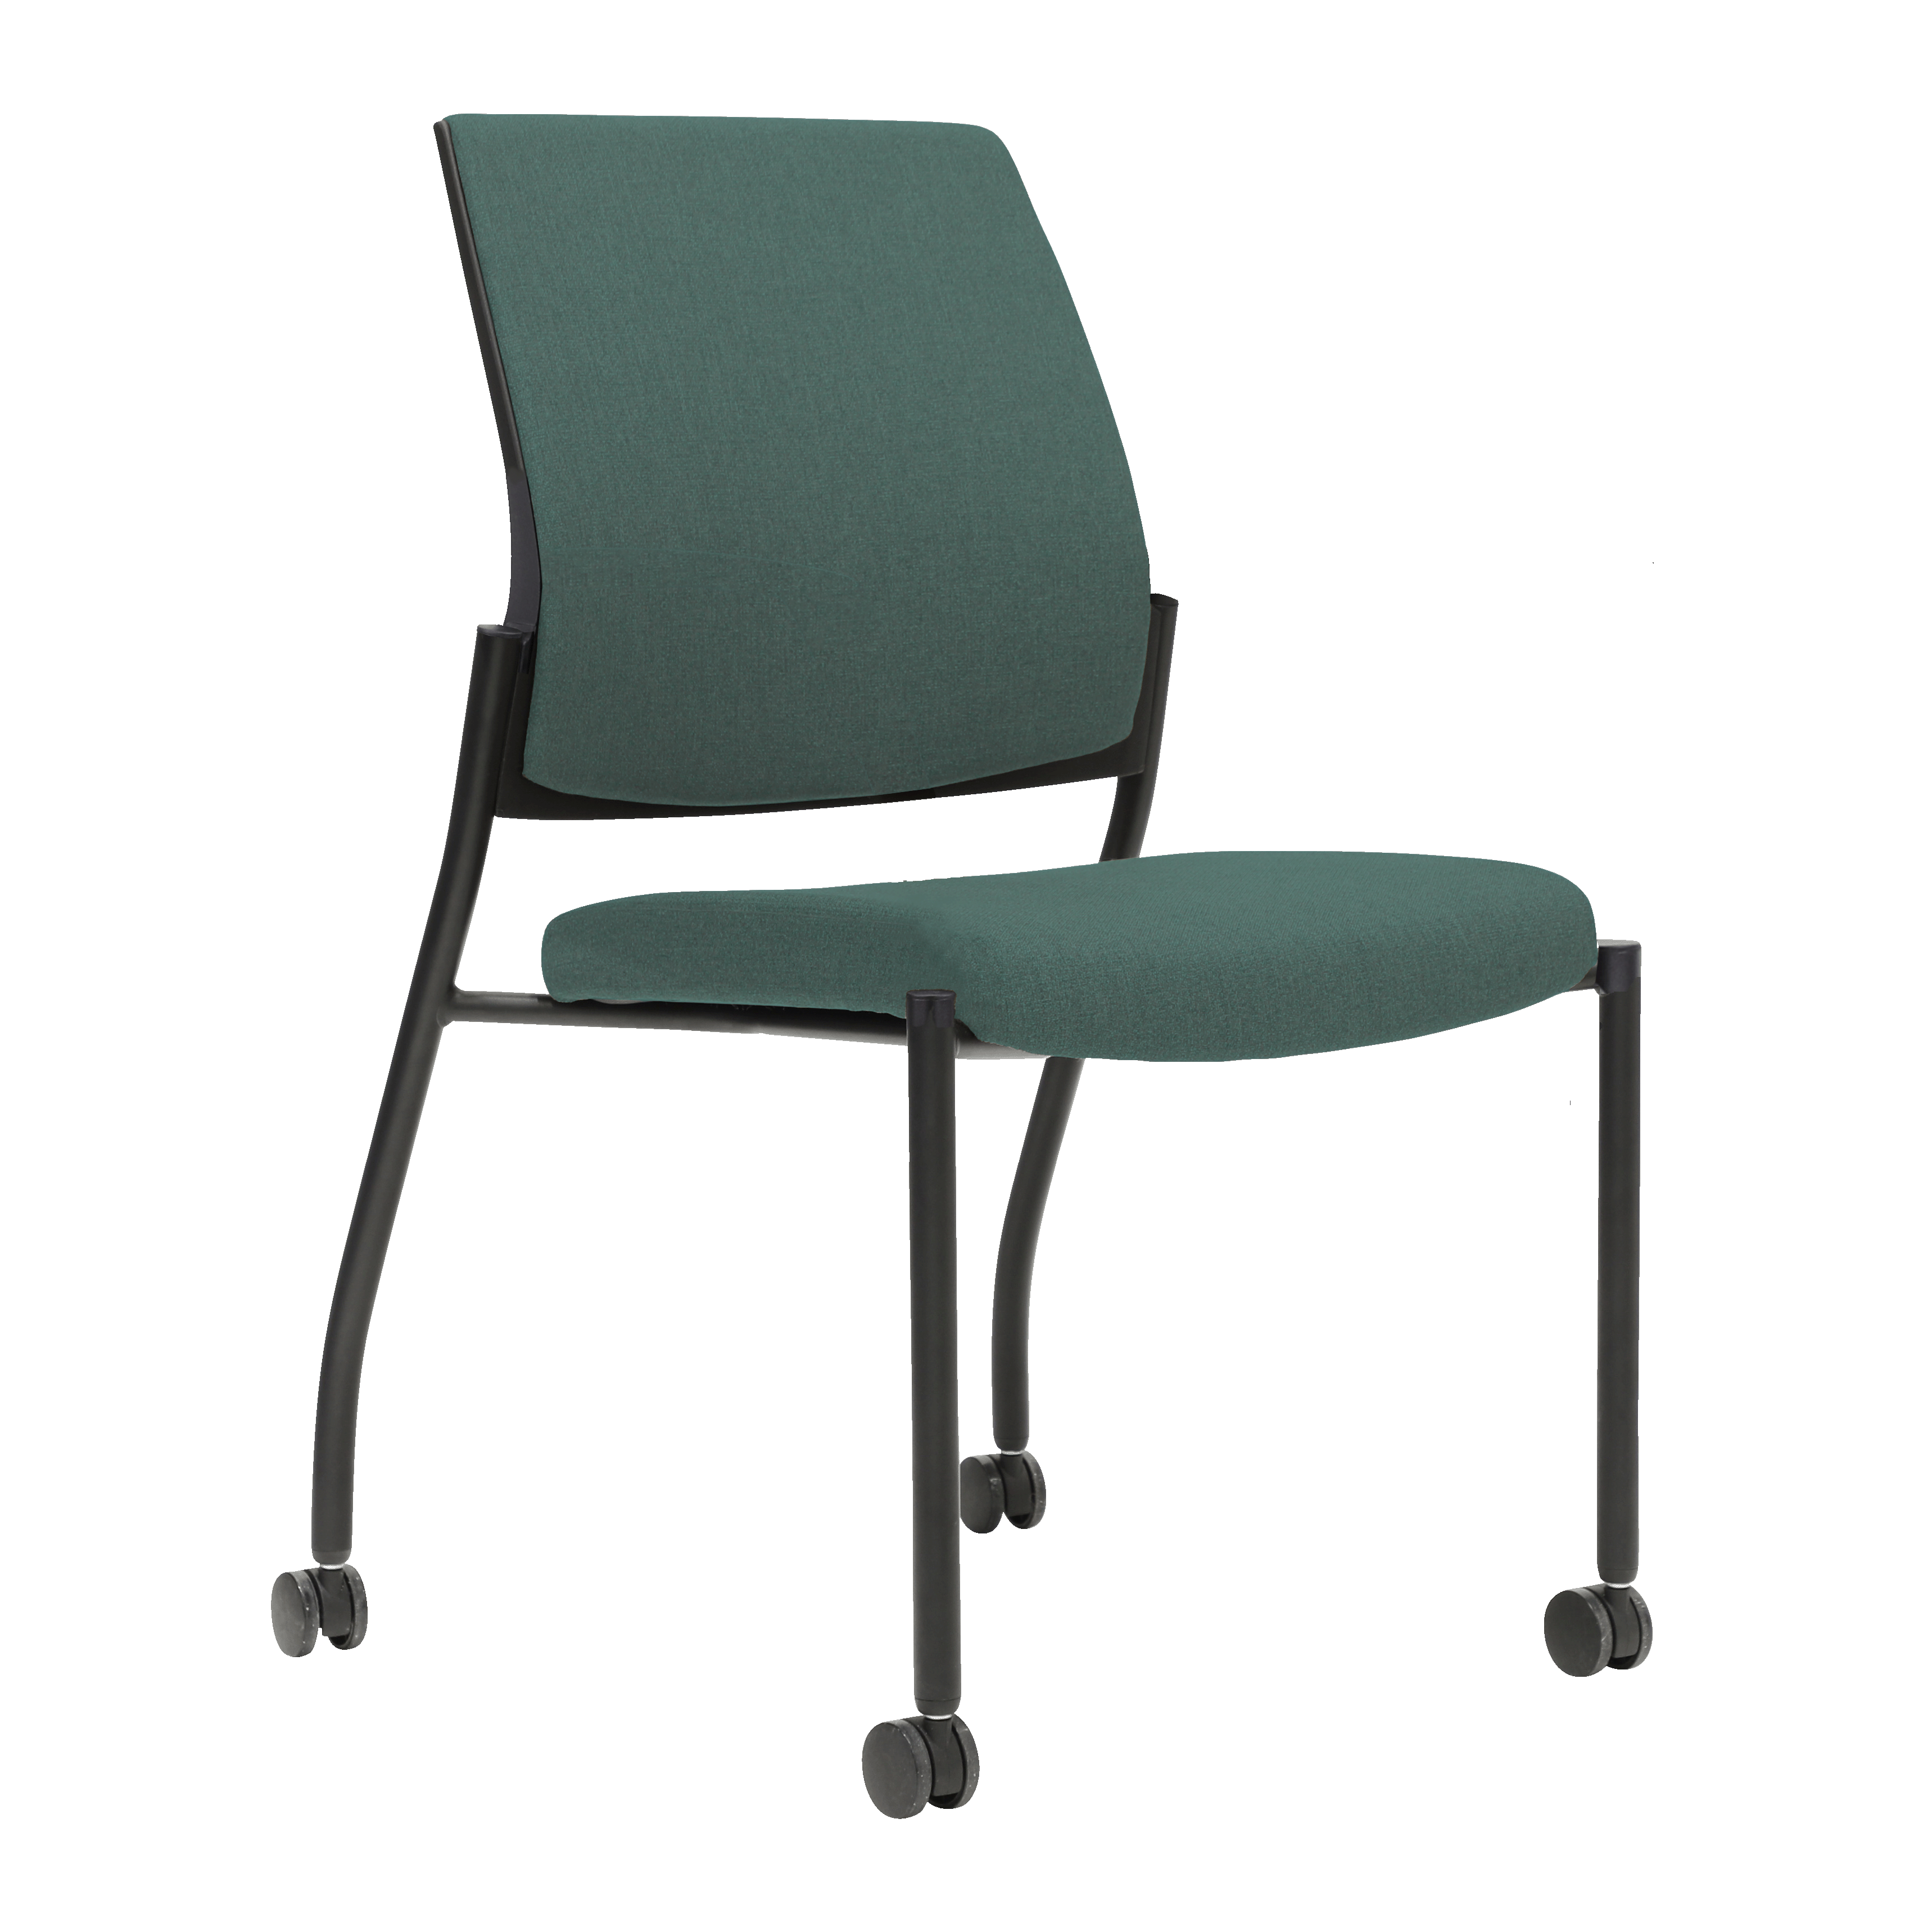 Urbin Full (Teal / No Side Arms)